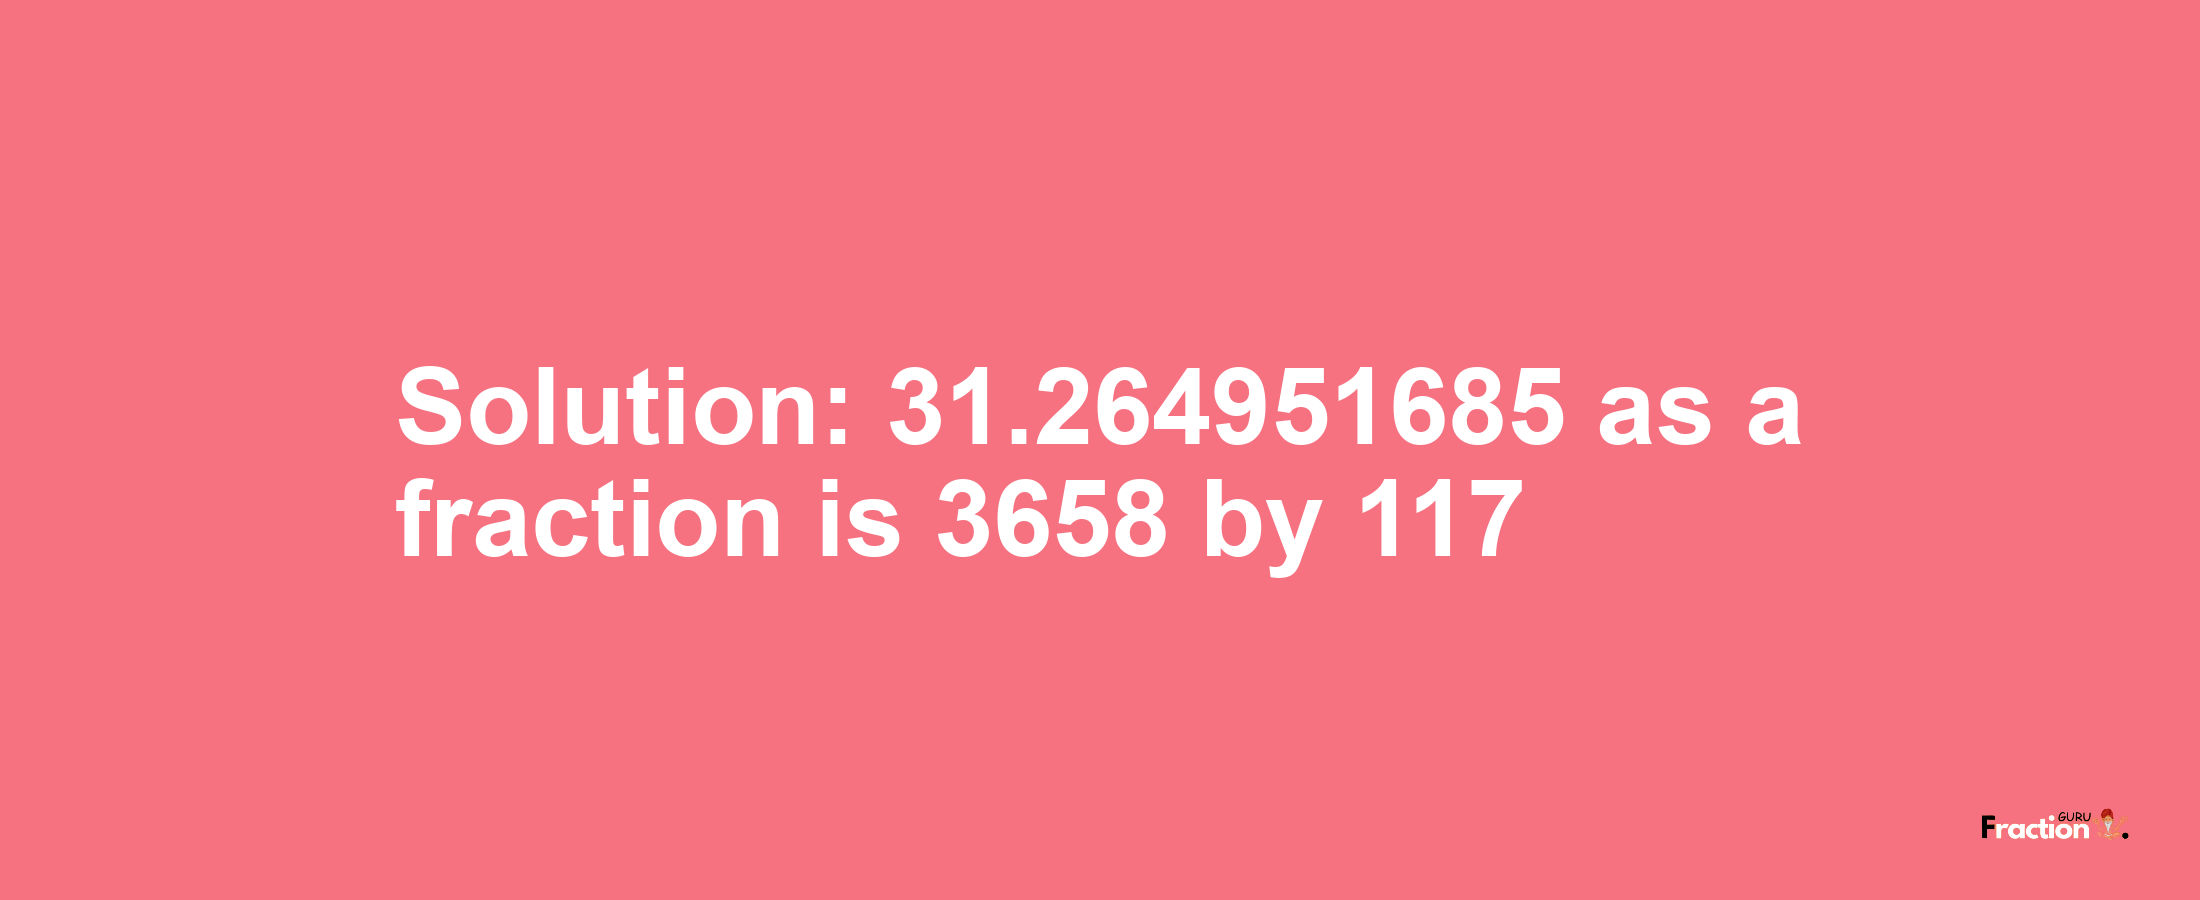 Solution:31.264951685 as a fraction is 3658/117